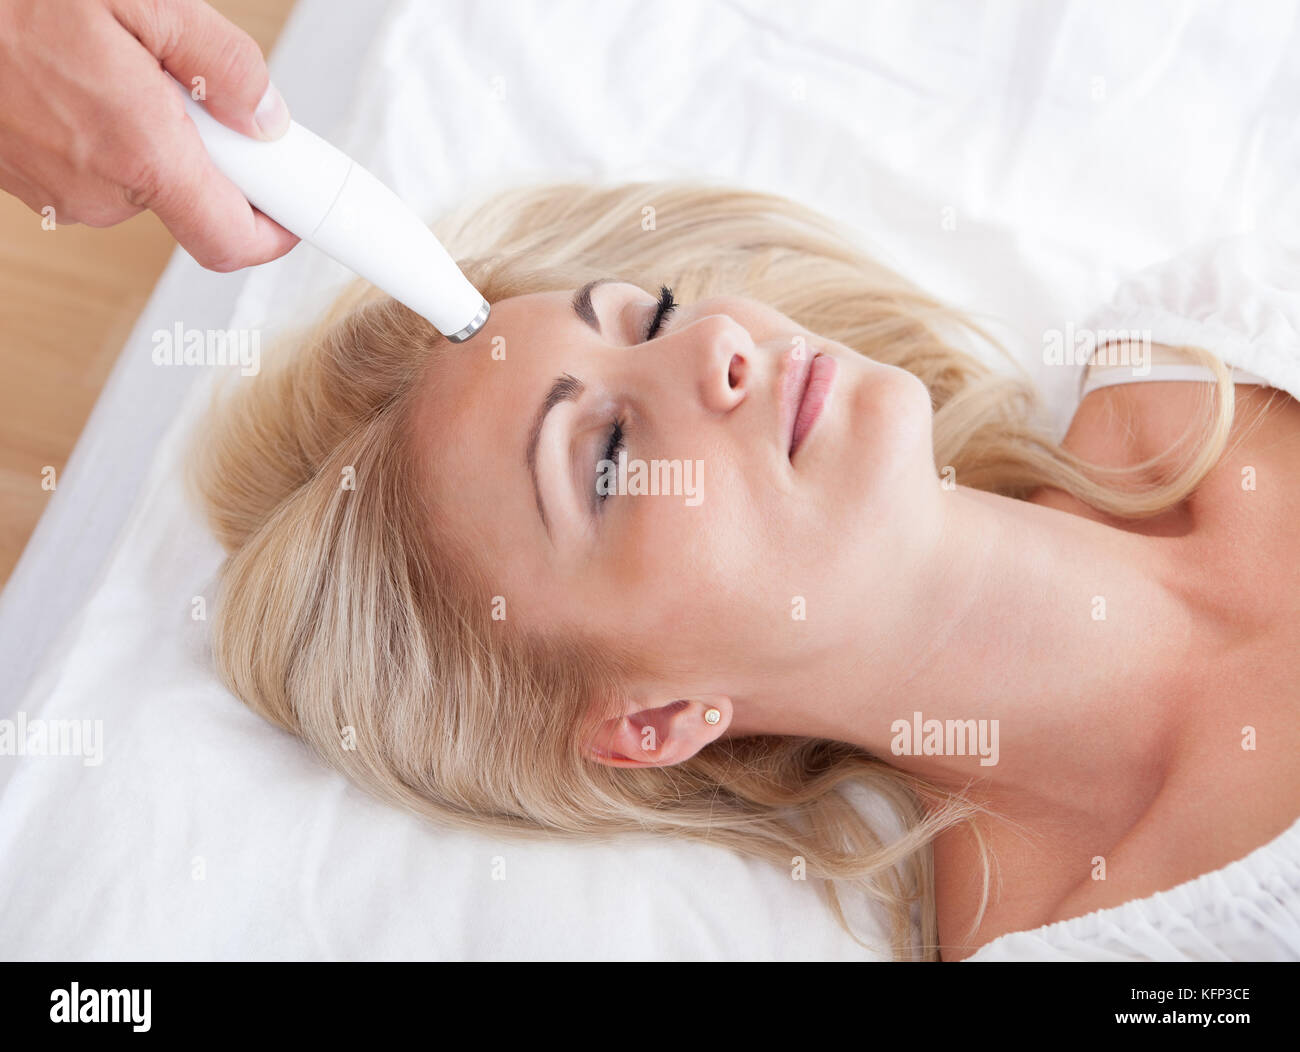 Profile View Of Happy Young Woman During Cosmetic Treatment, Indoors Stock Photo